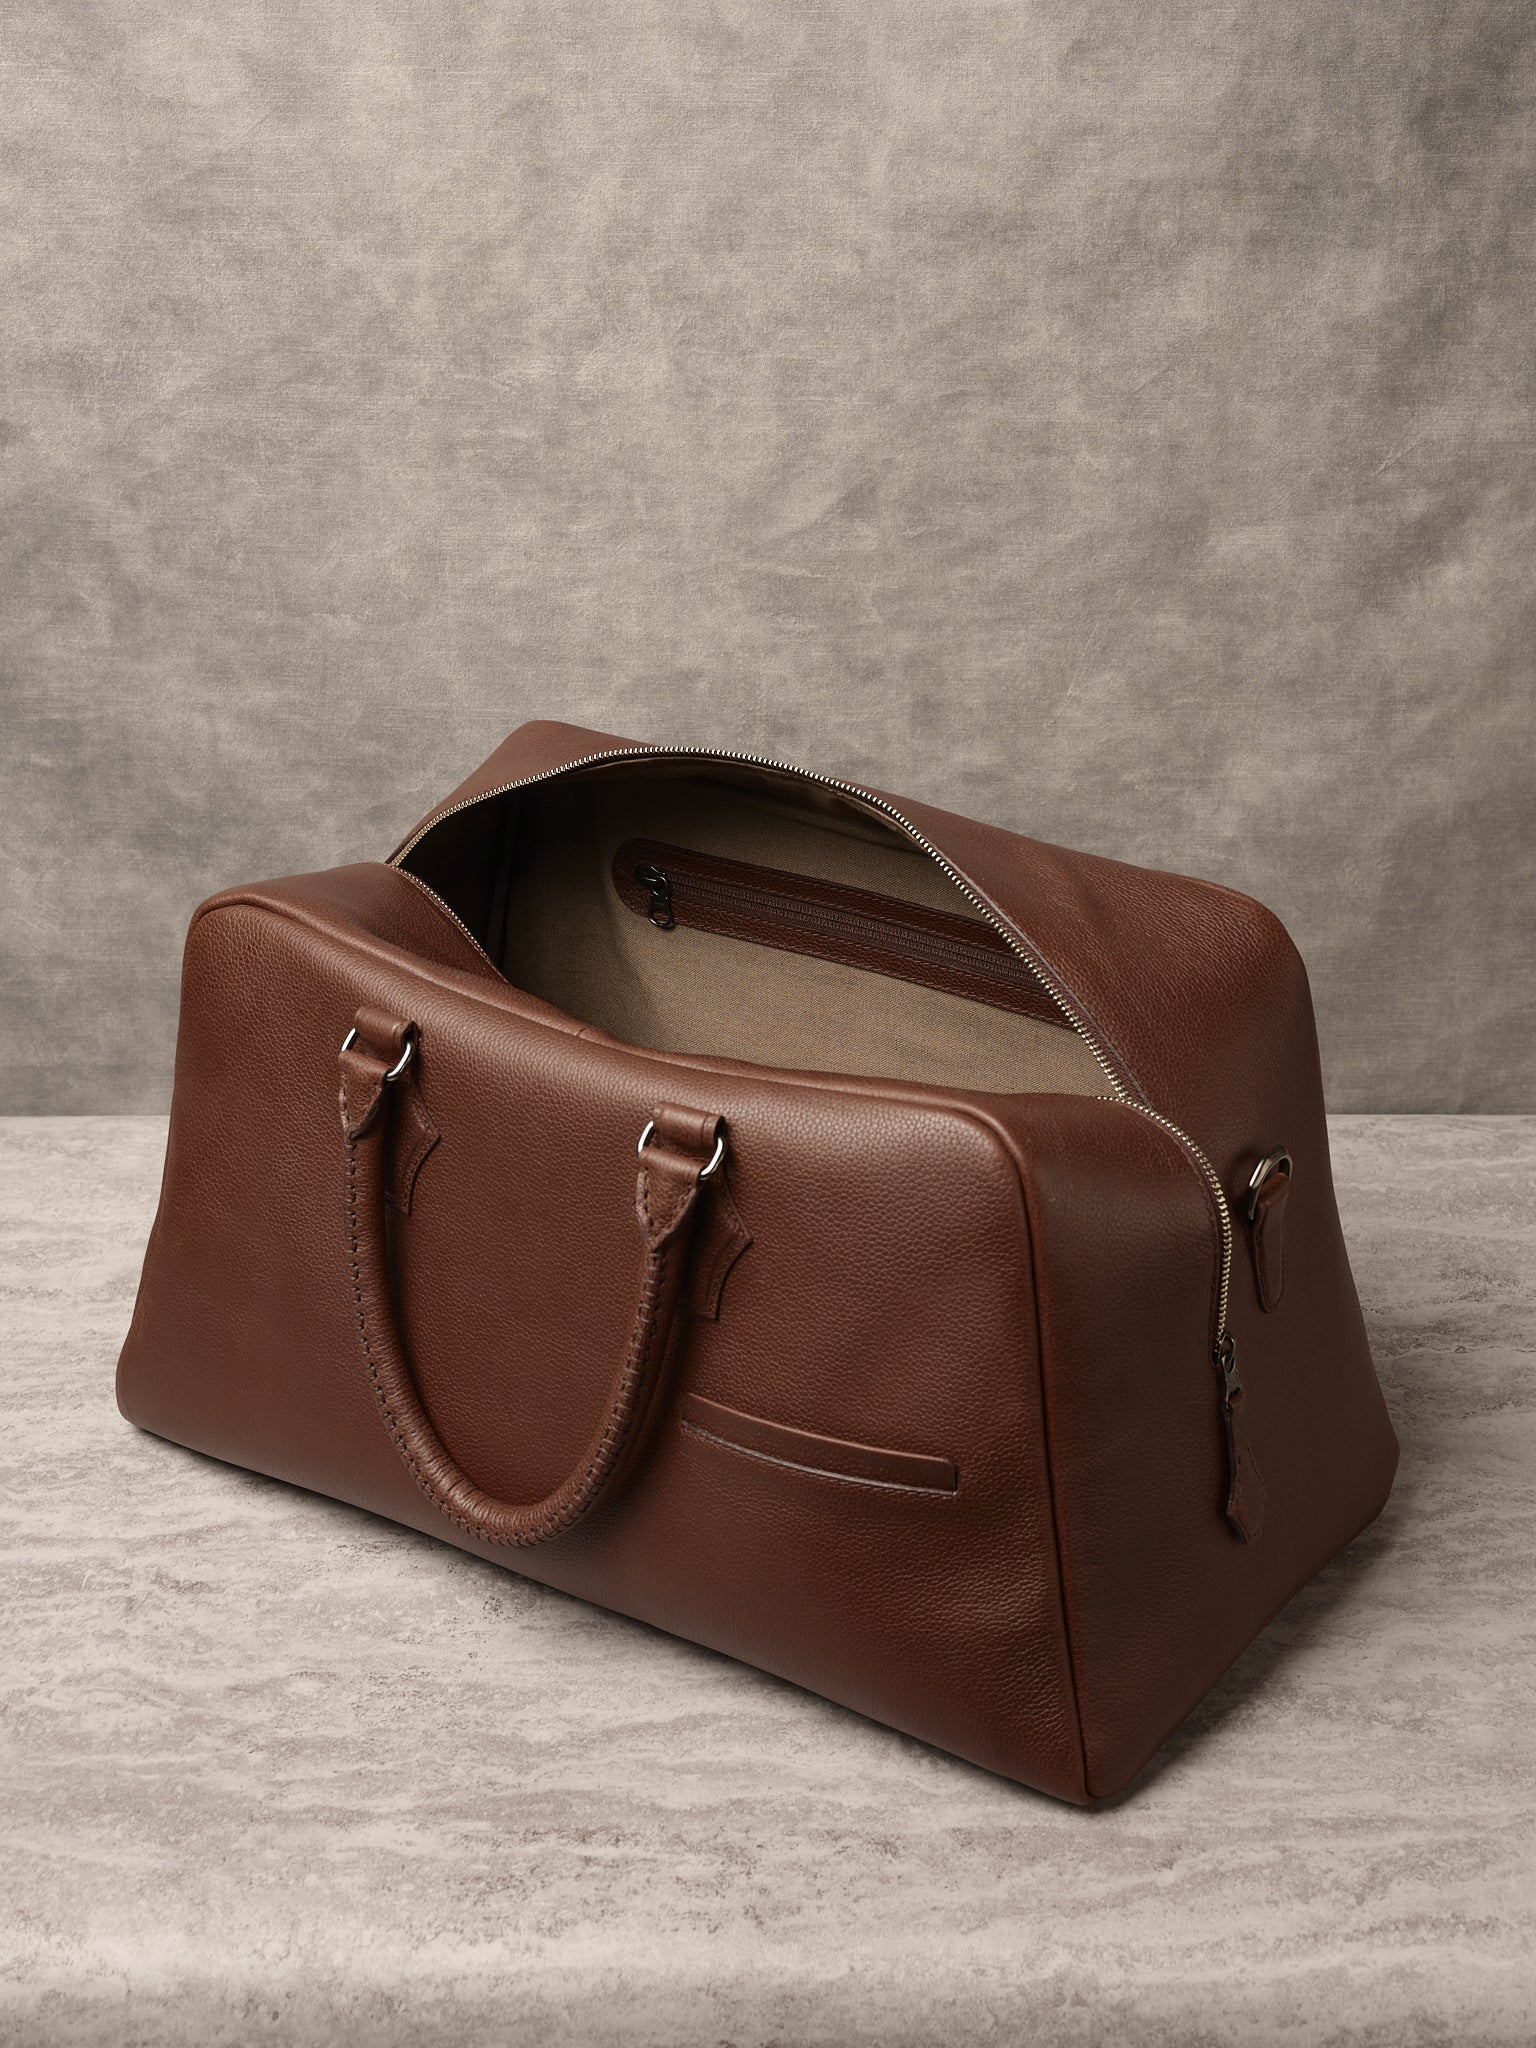 Wide Compartment. Mens Leather Weekender Bag Brown by Capra Leather